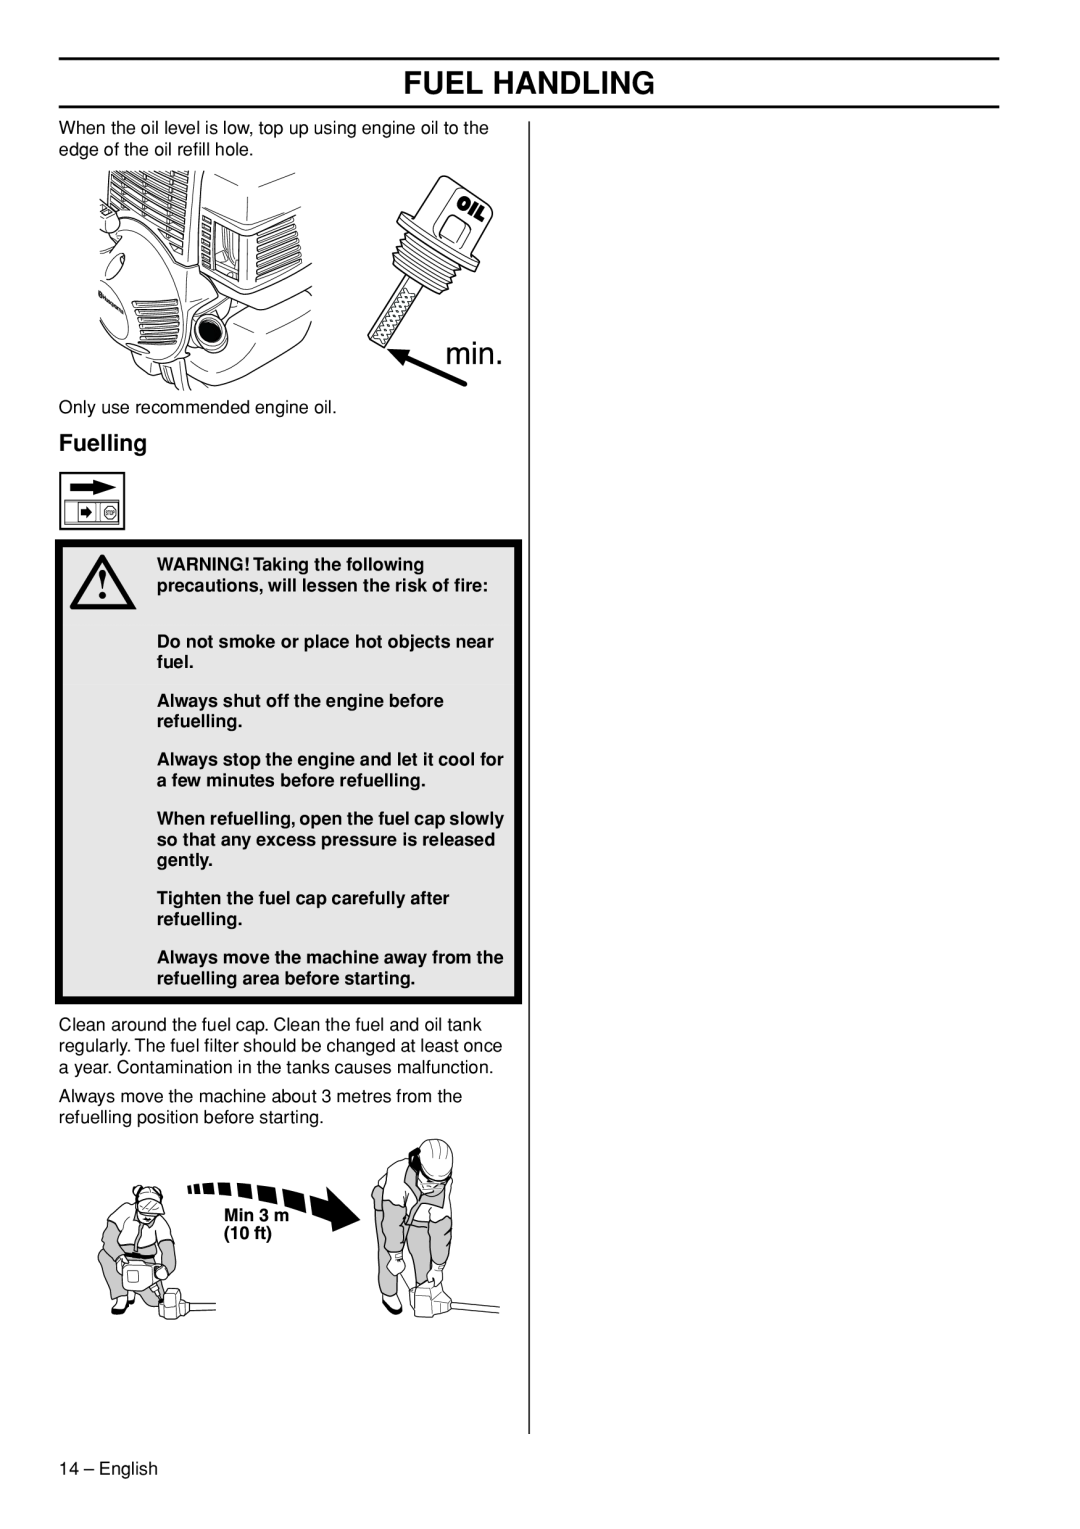 Husqvarna 1153286-26 Fuelling, WARNING! Taking the following, Do not smoke or place hot objects near fuel, Fuel Handling 